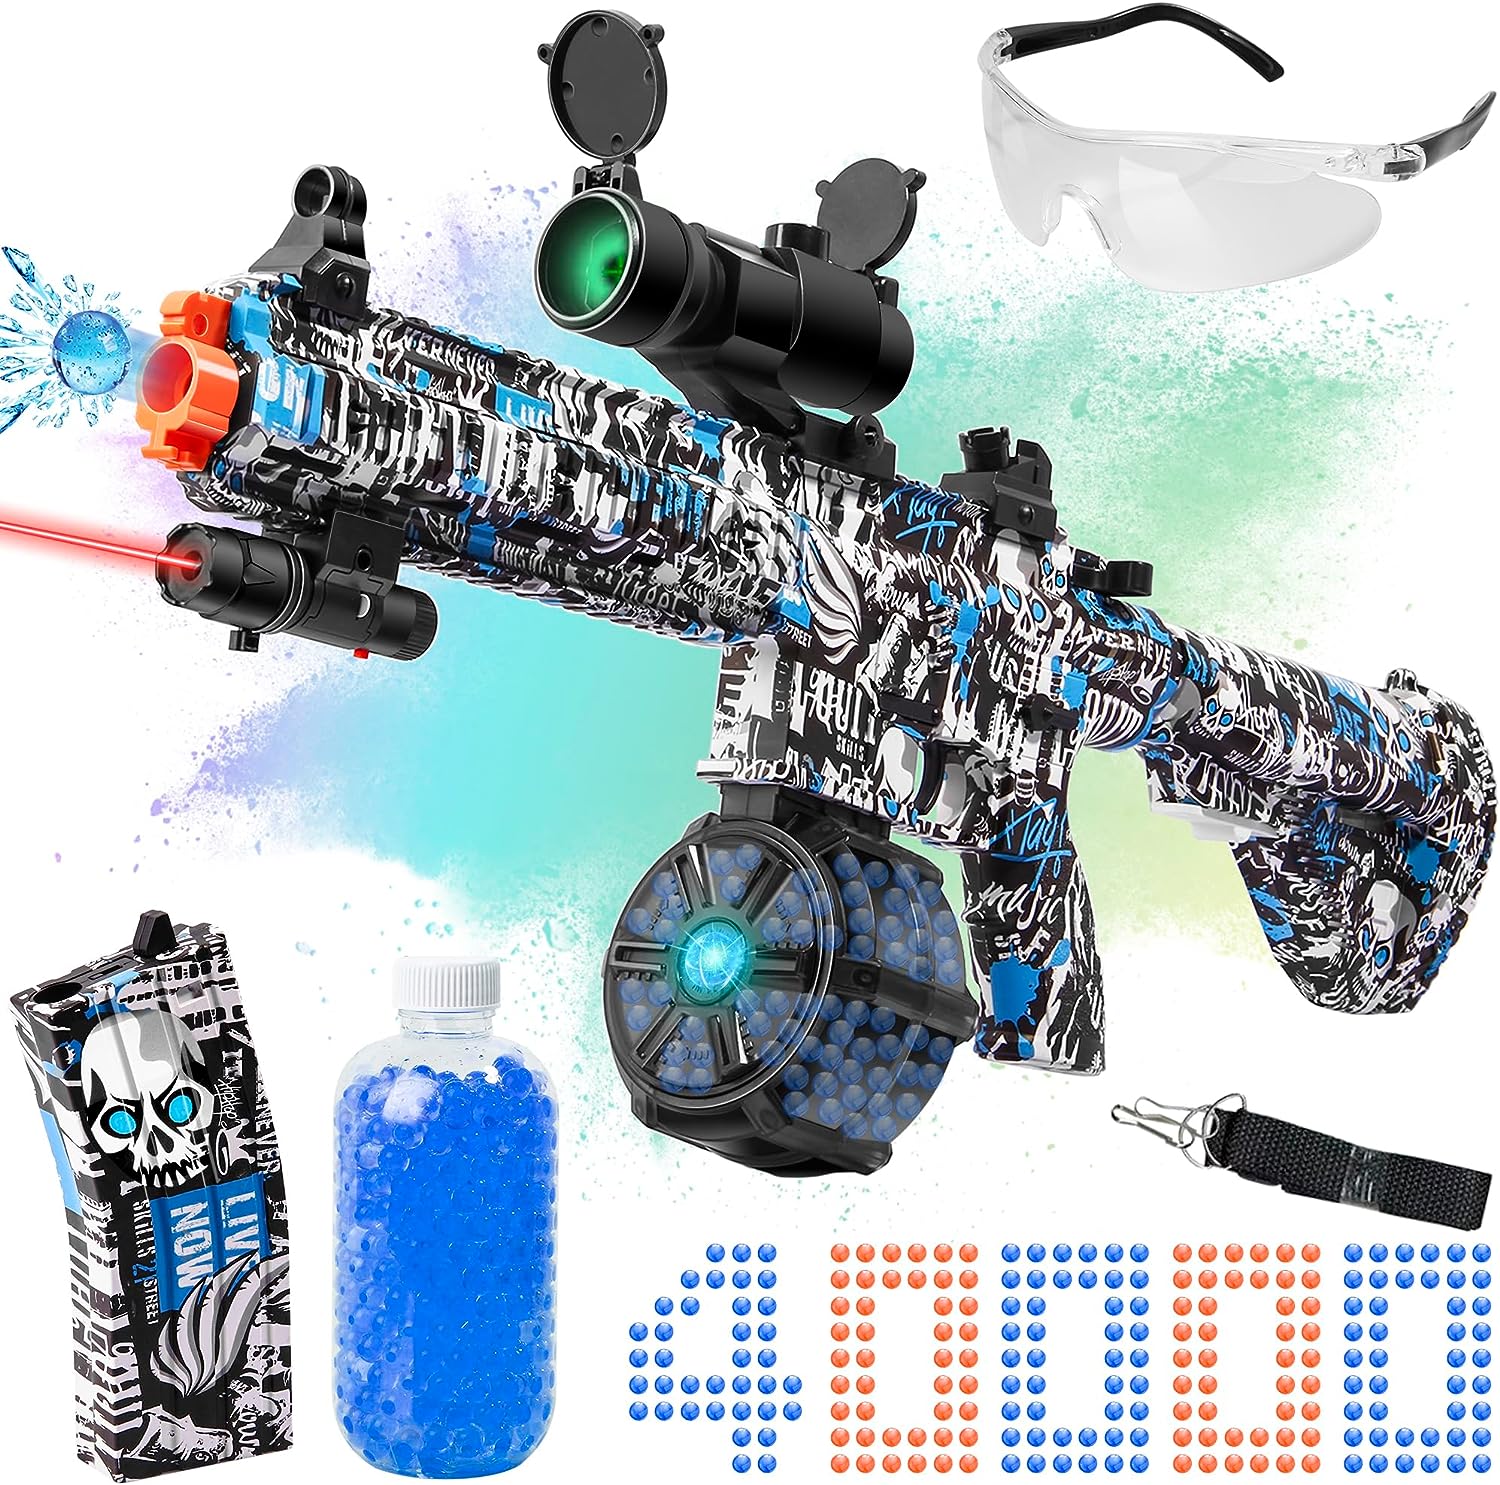 Manual & automatic orbeez gun with a laser and other items.